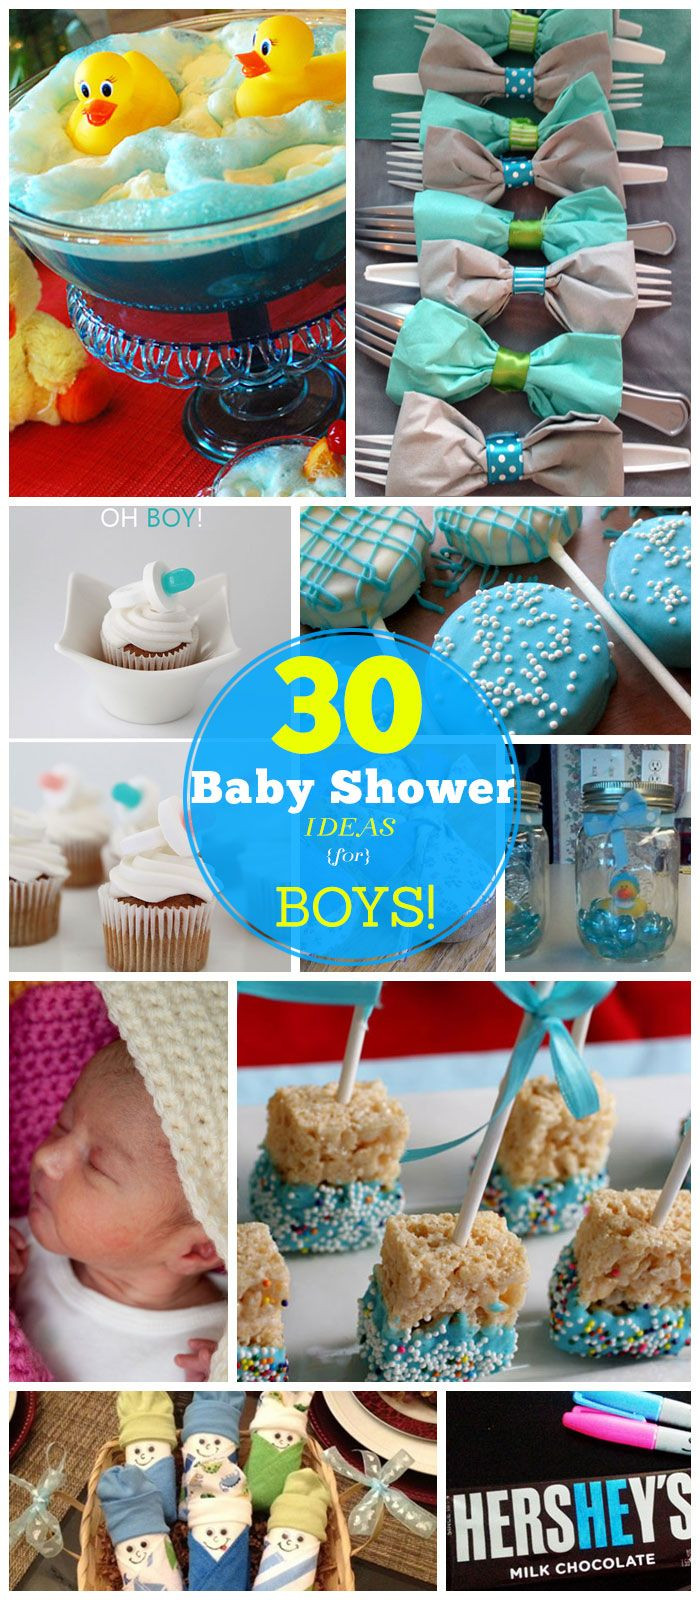 DIY Baby Shower Gifts For Boy
 20 DIY Baby Shower Ideas for Boys